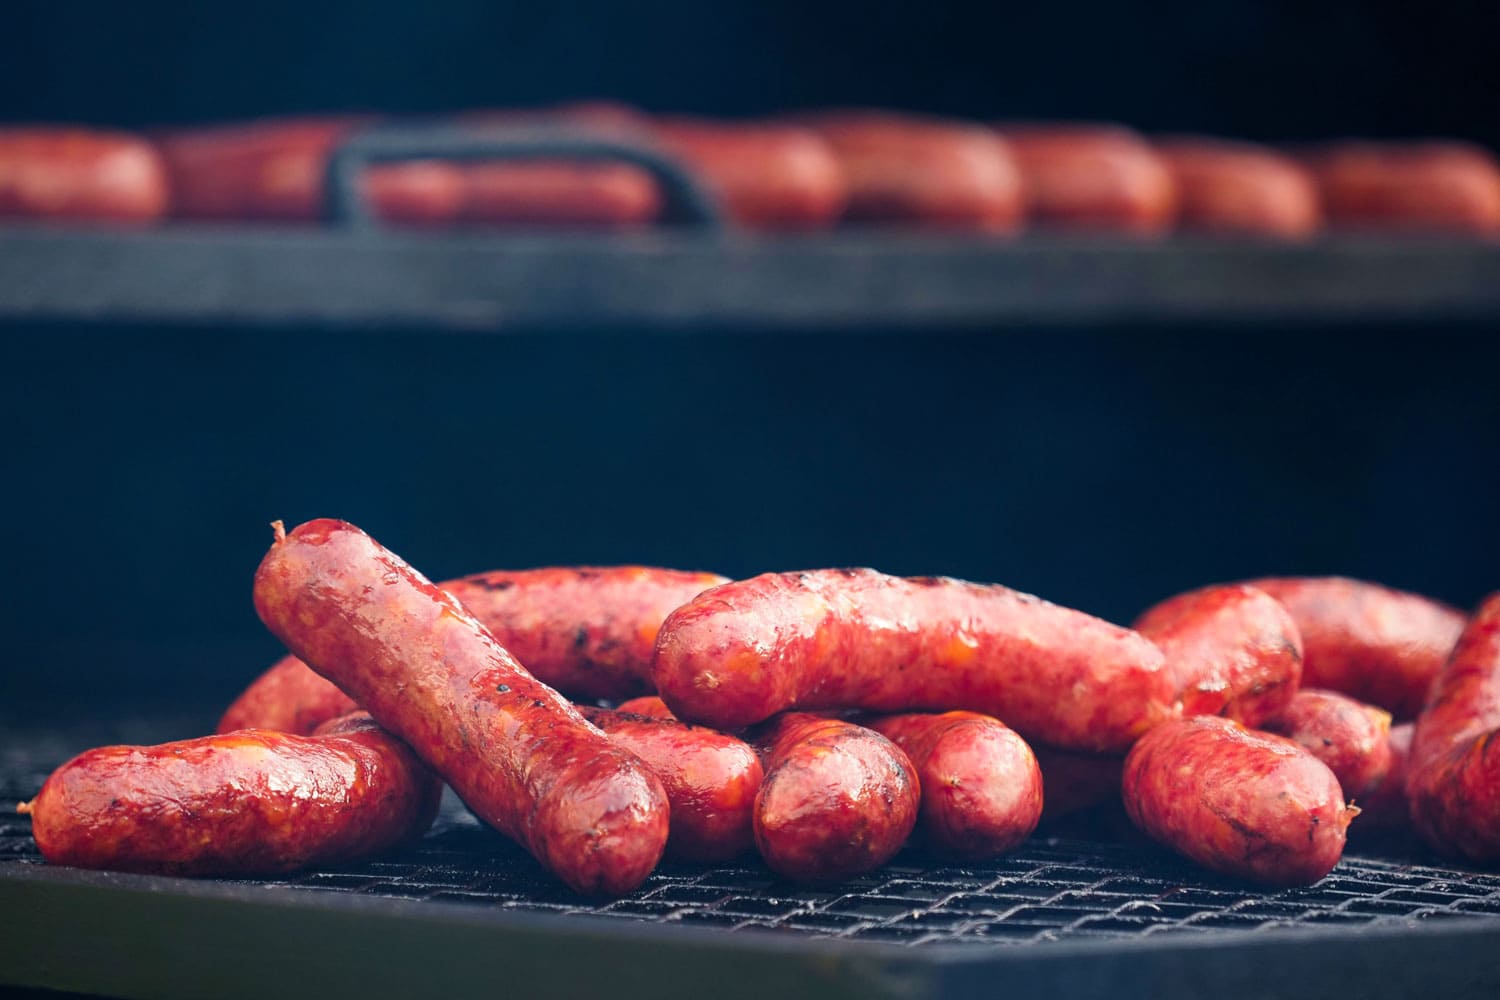 Sausages are prepared in a multi-tiered grill, smokehouse. Smoked sausages 